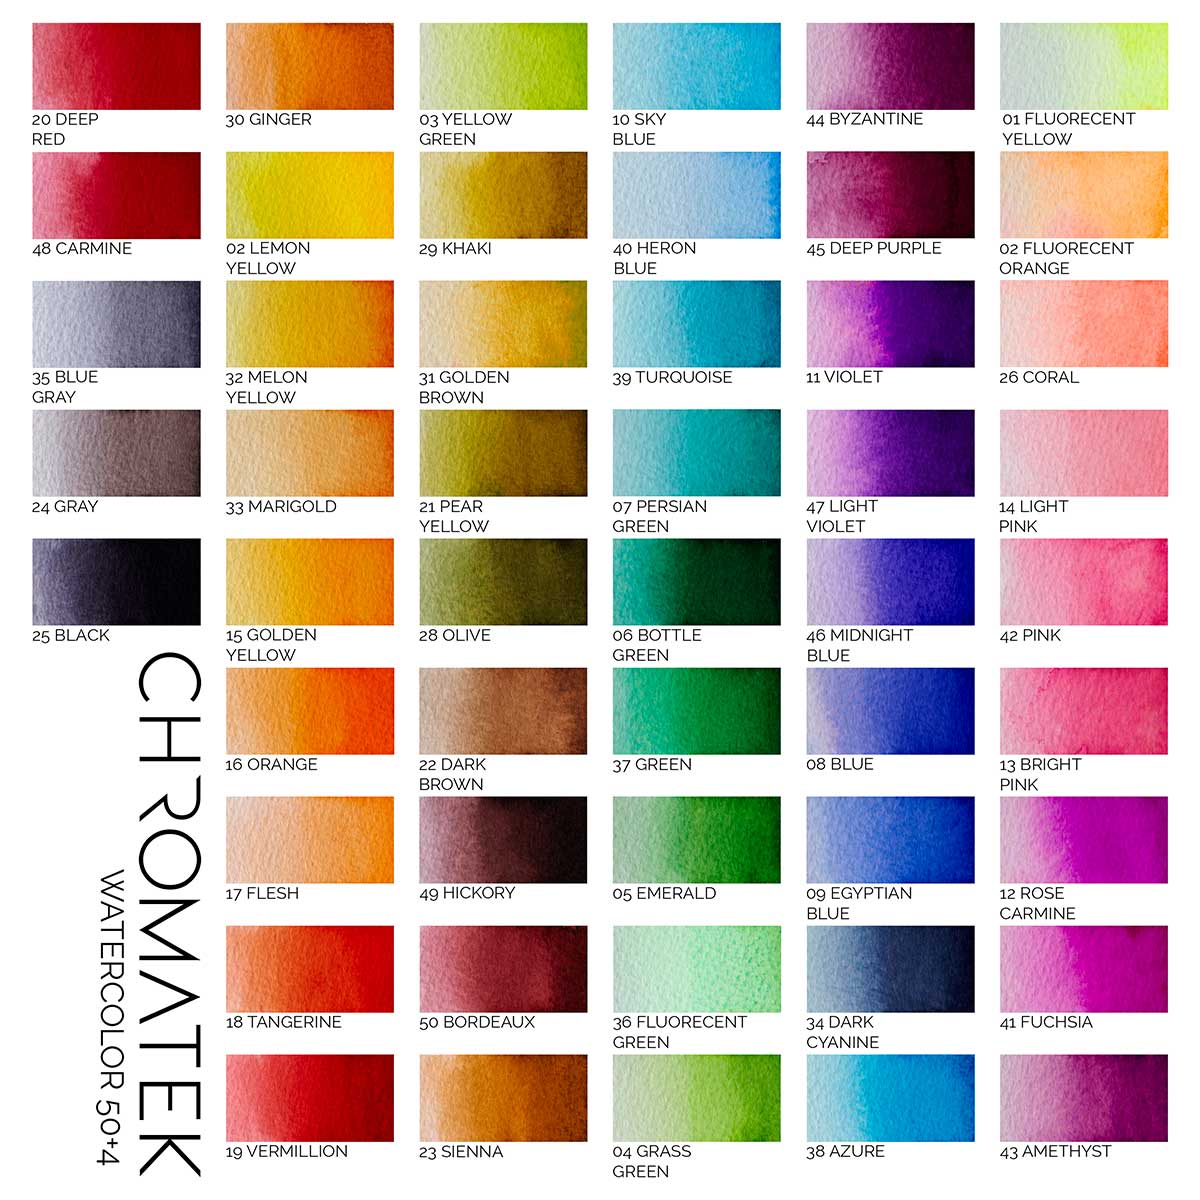 Water Brush Pens by Chromatek. Set of 6 Aqua Pen Painting Brushes.  Including Online Video Tutorials and Downloadable Picture Templates. Ideal  for All